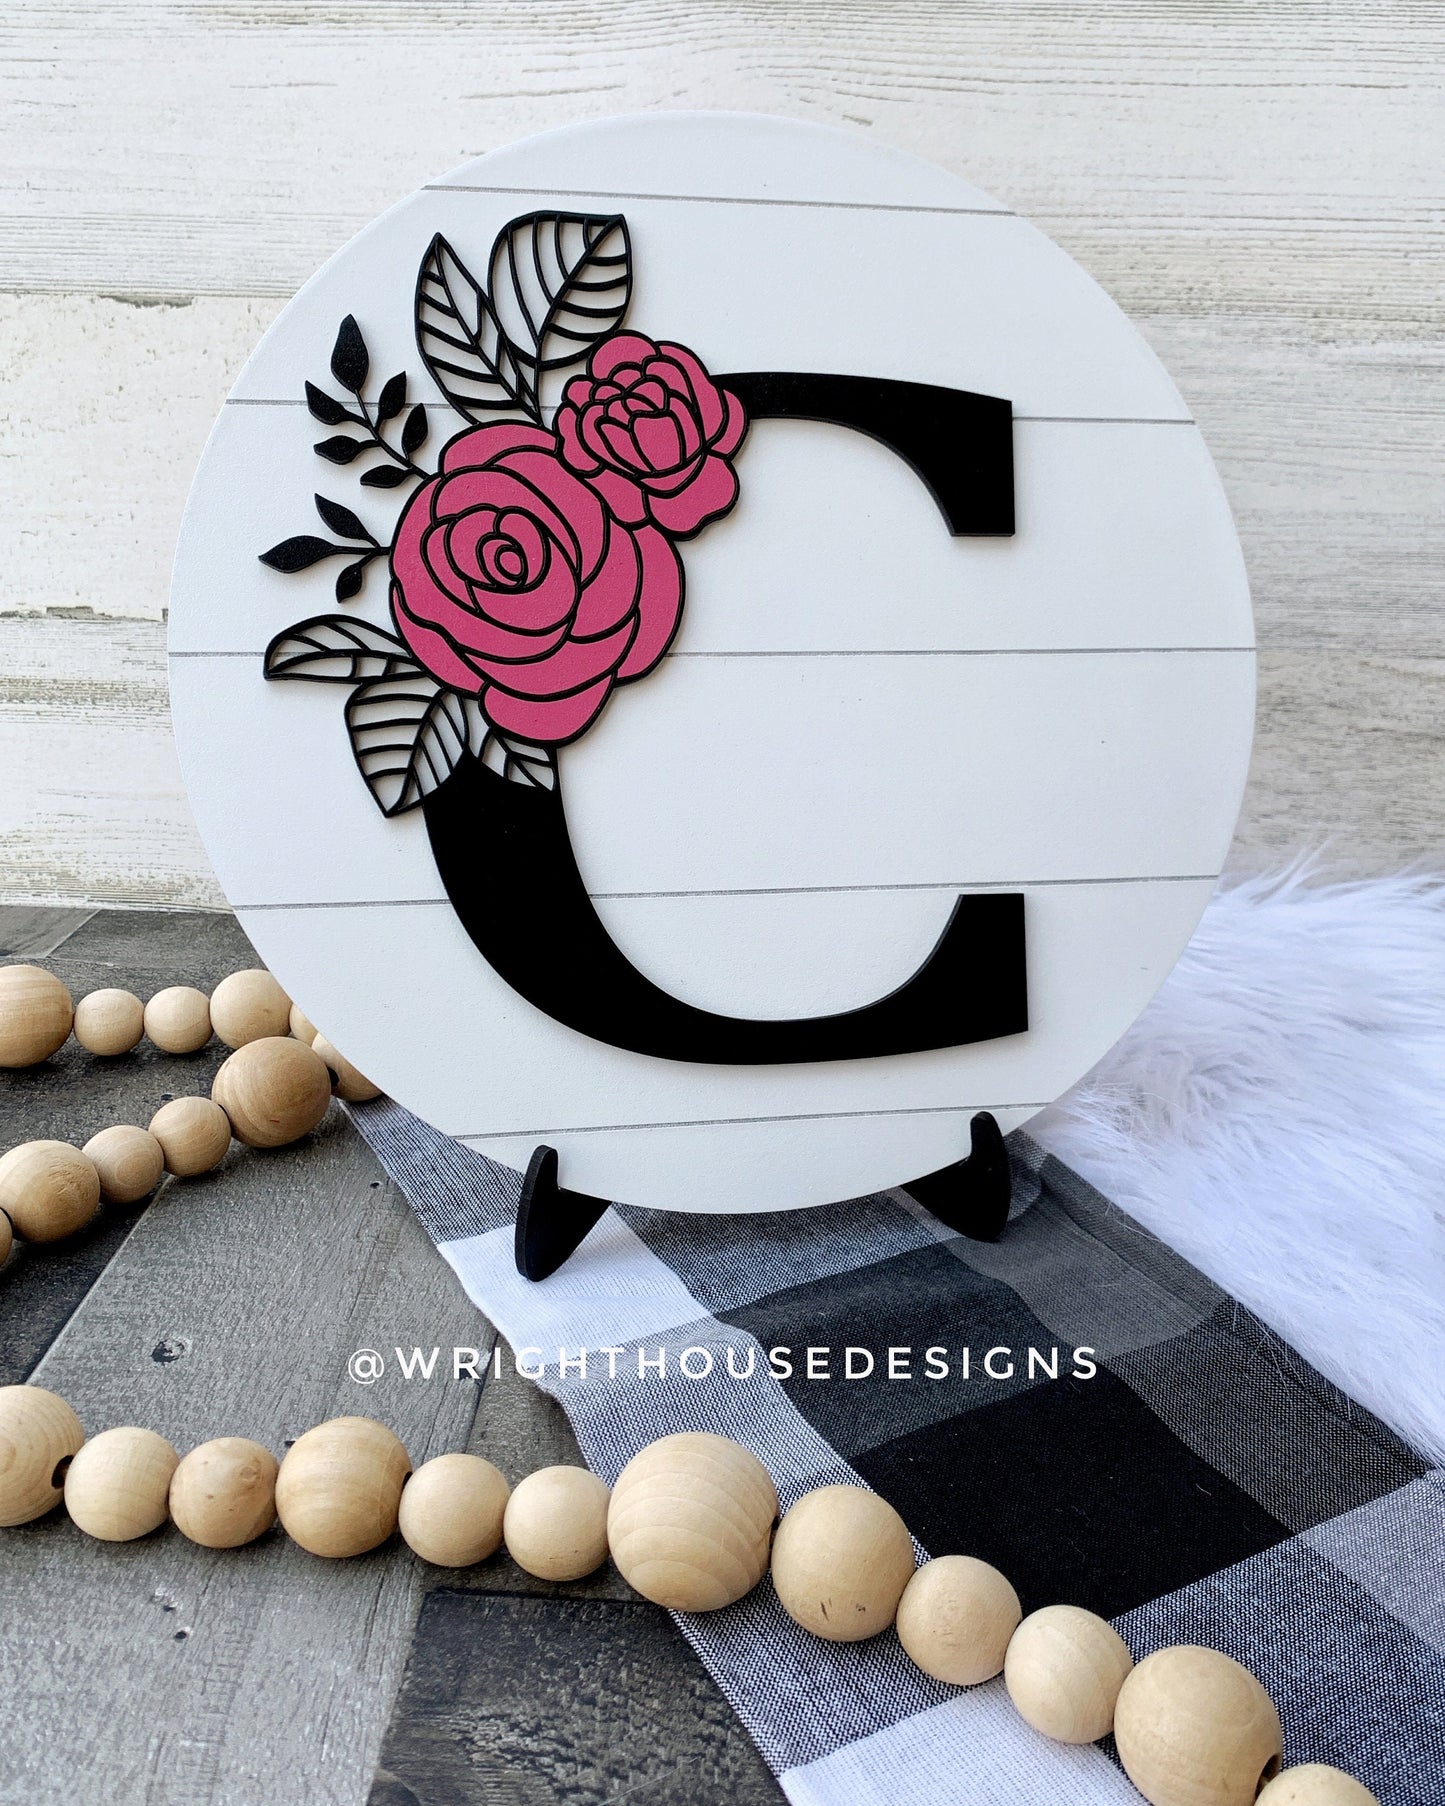 Rose Floral Personalized Monogram Family Name - Laser Cut Wooden Shiplap Round Sign - Rustic Farmhouse - Southern Style Bookshelf Decor